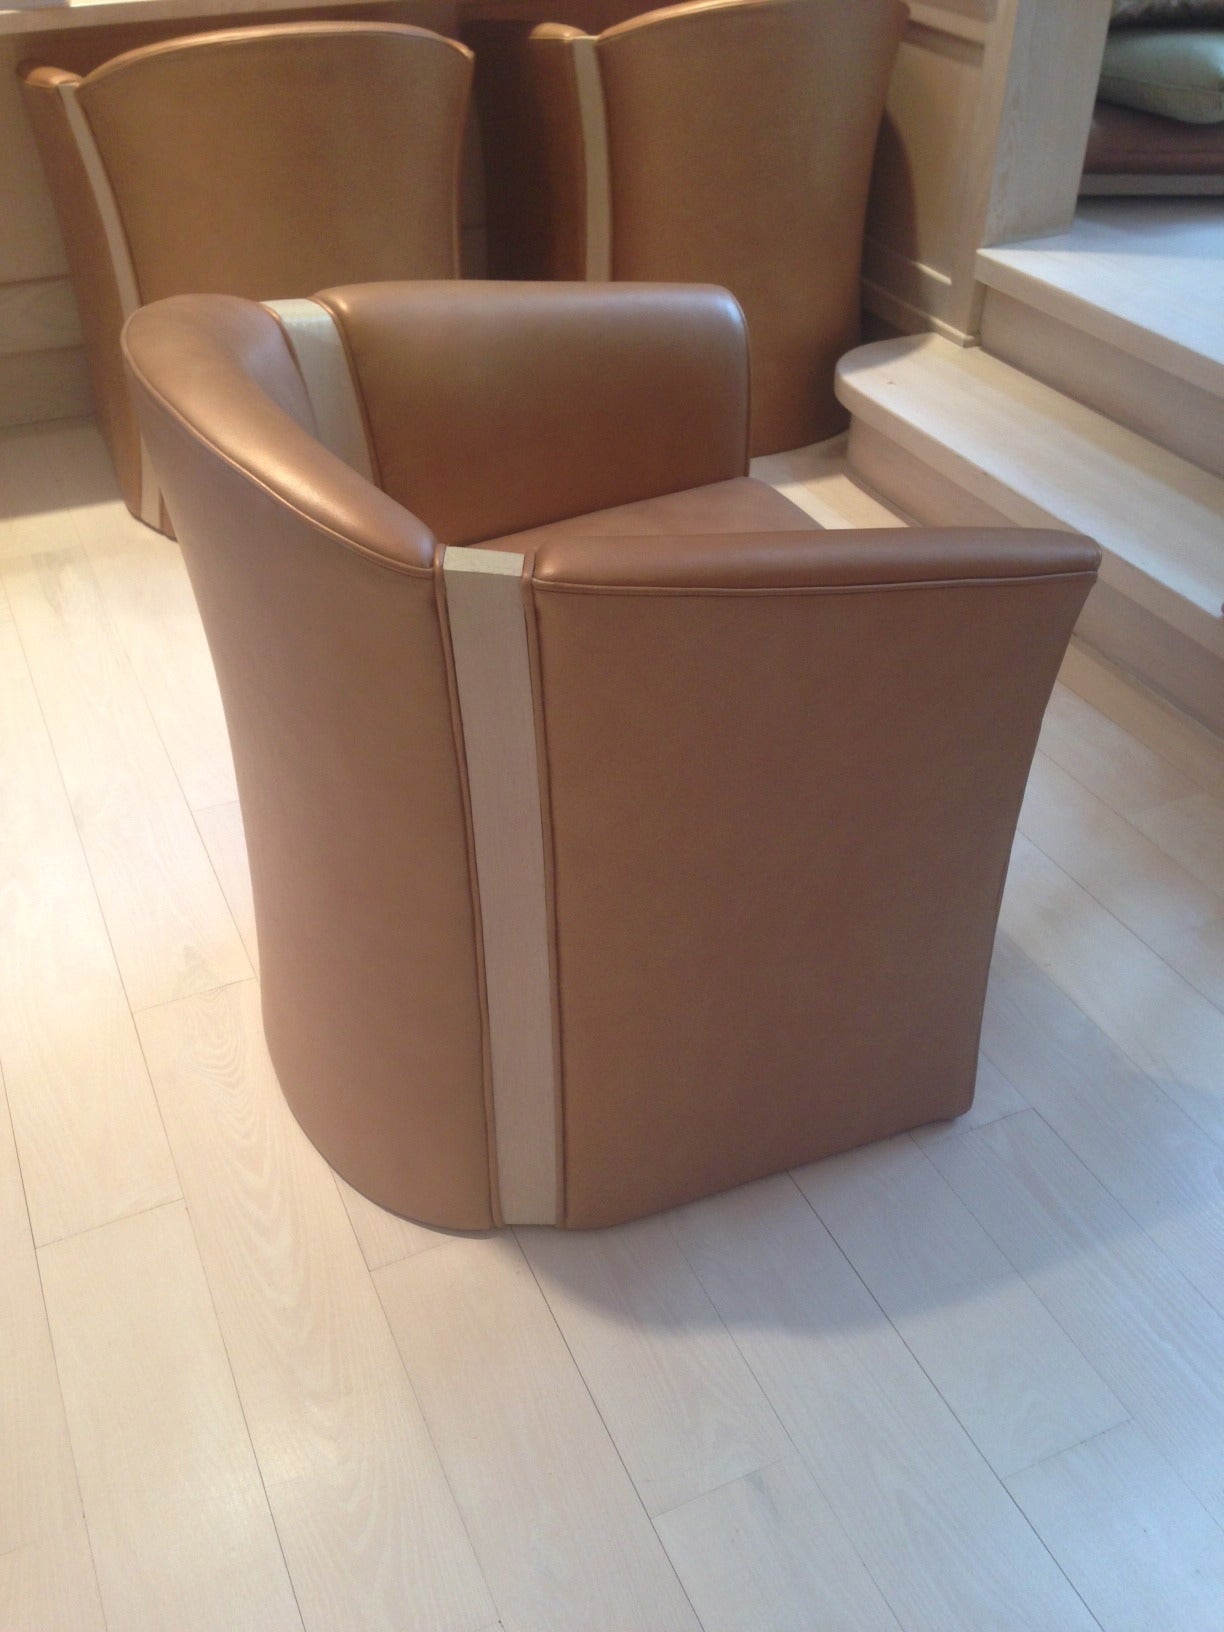 Set of 4 Steve Grafton Barrel back chairs.  Supple Light Brown Leather with wood inset. Custom made.

Seat depth 20